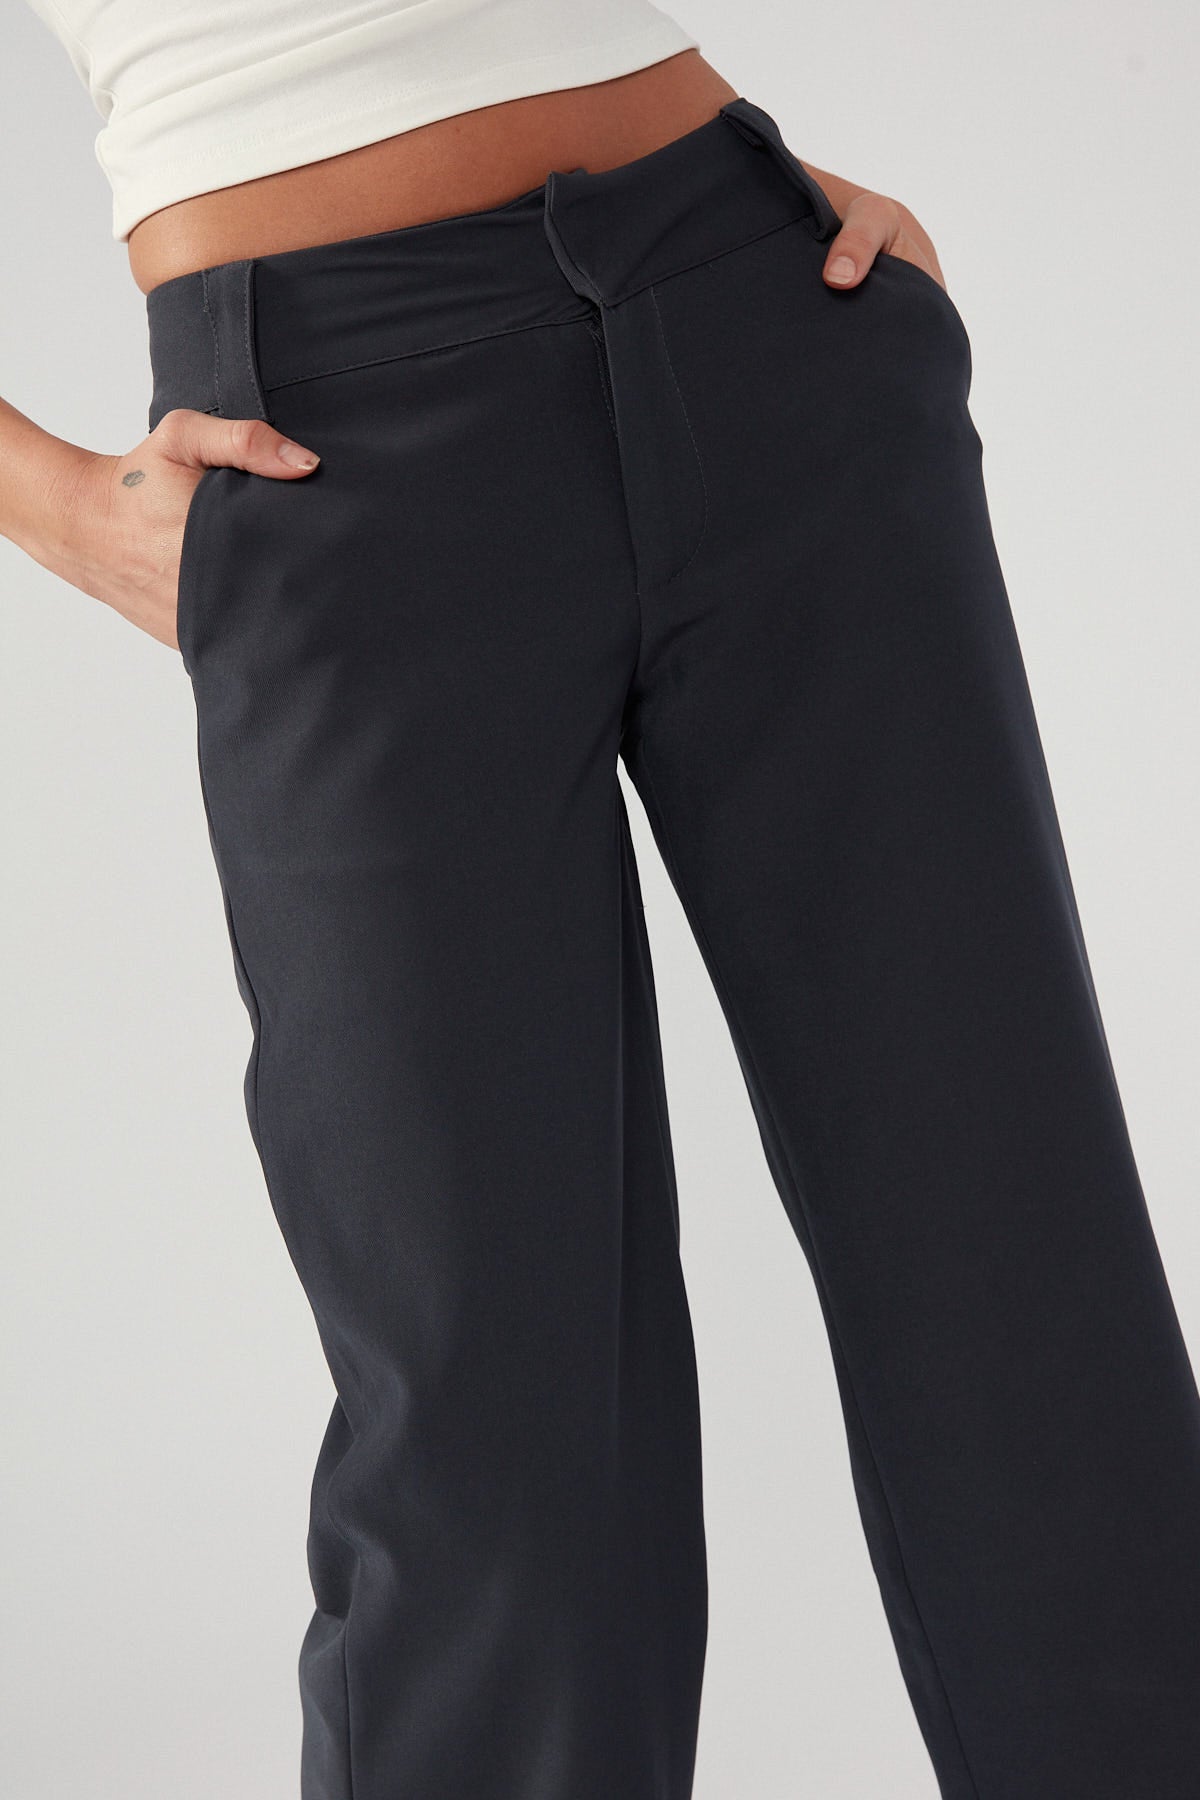 Perfect Stranger Coco Low Rise Pant Charcoal